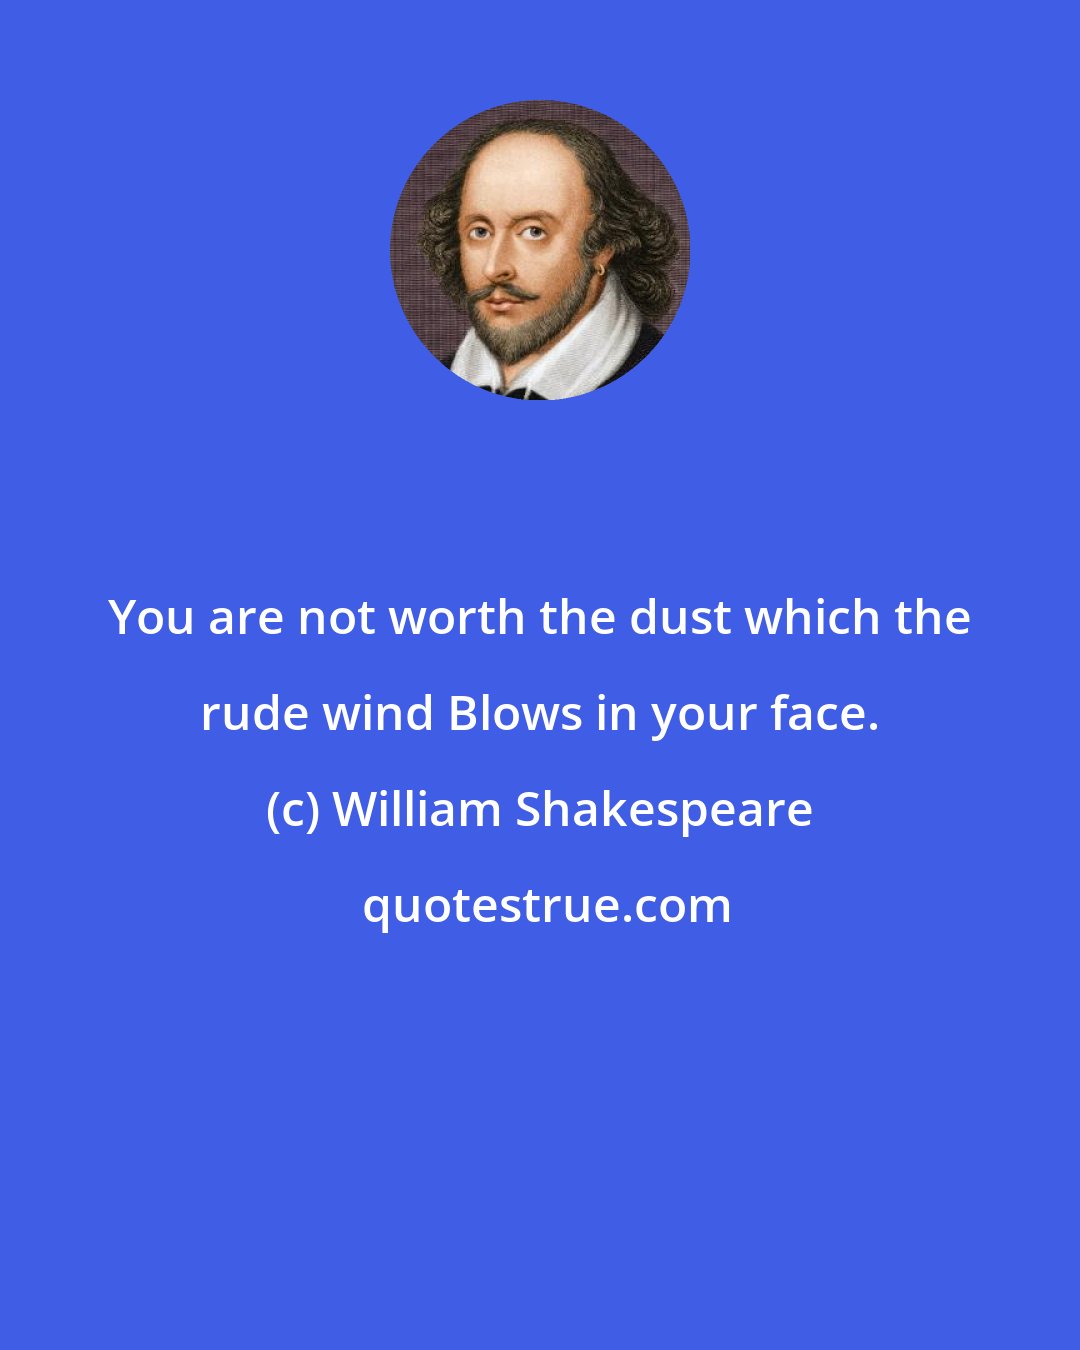 William Shakespeare: You are not worth the dust which the rude wind Blows in your face.